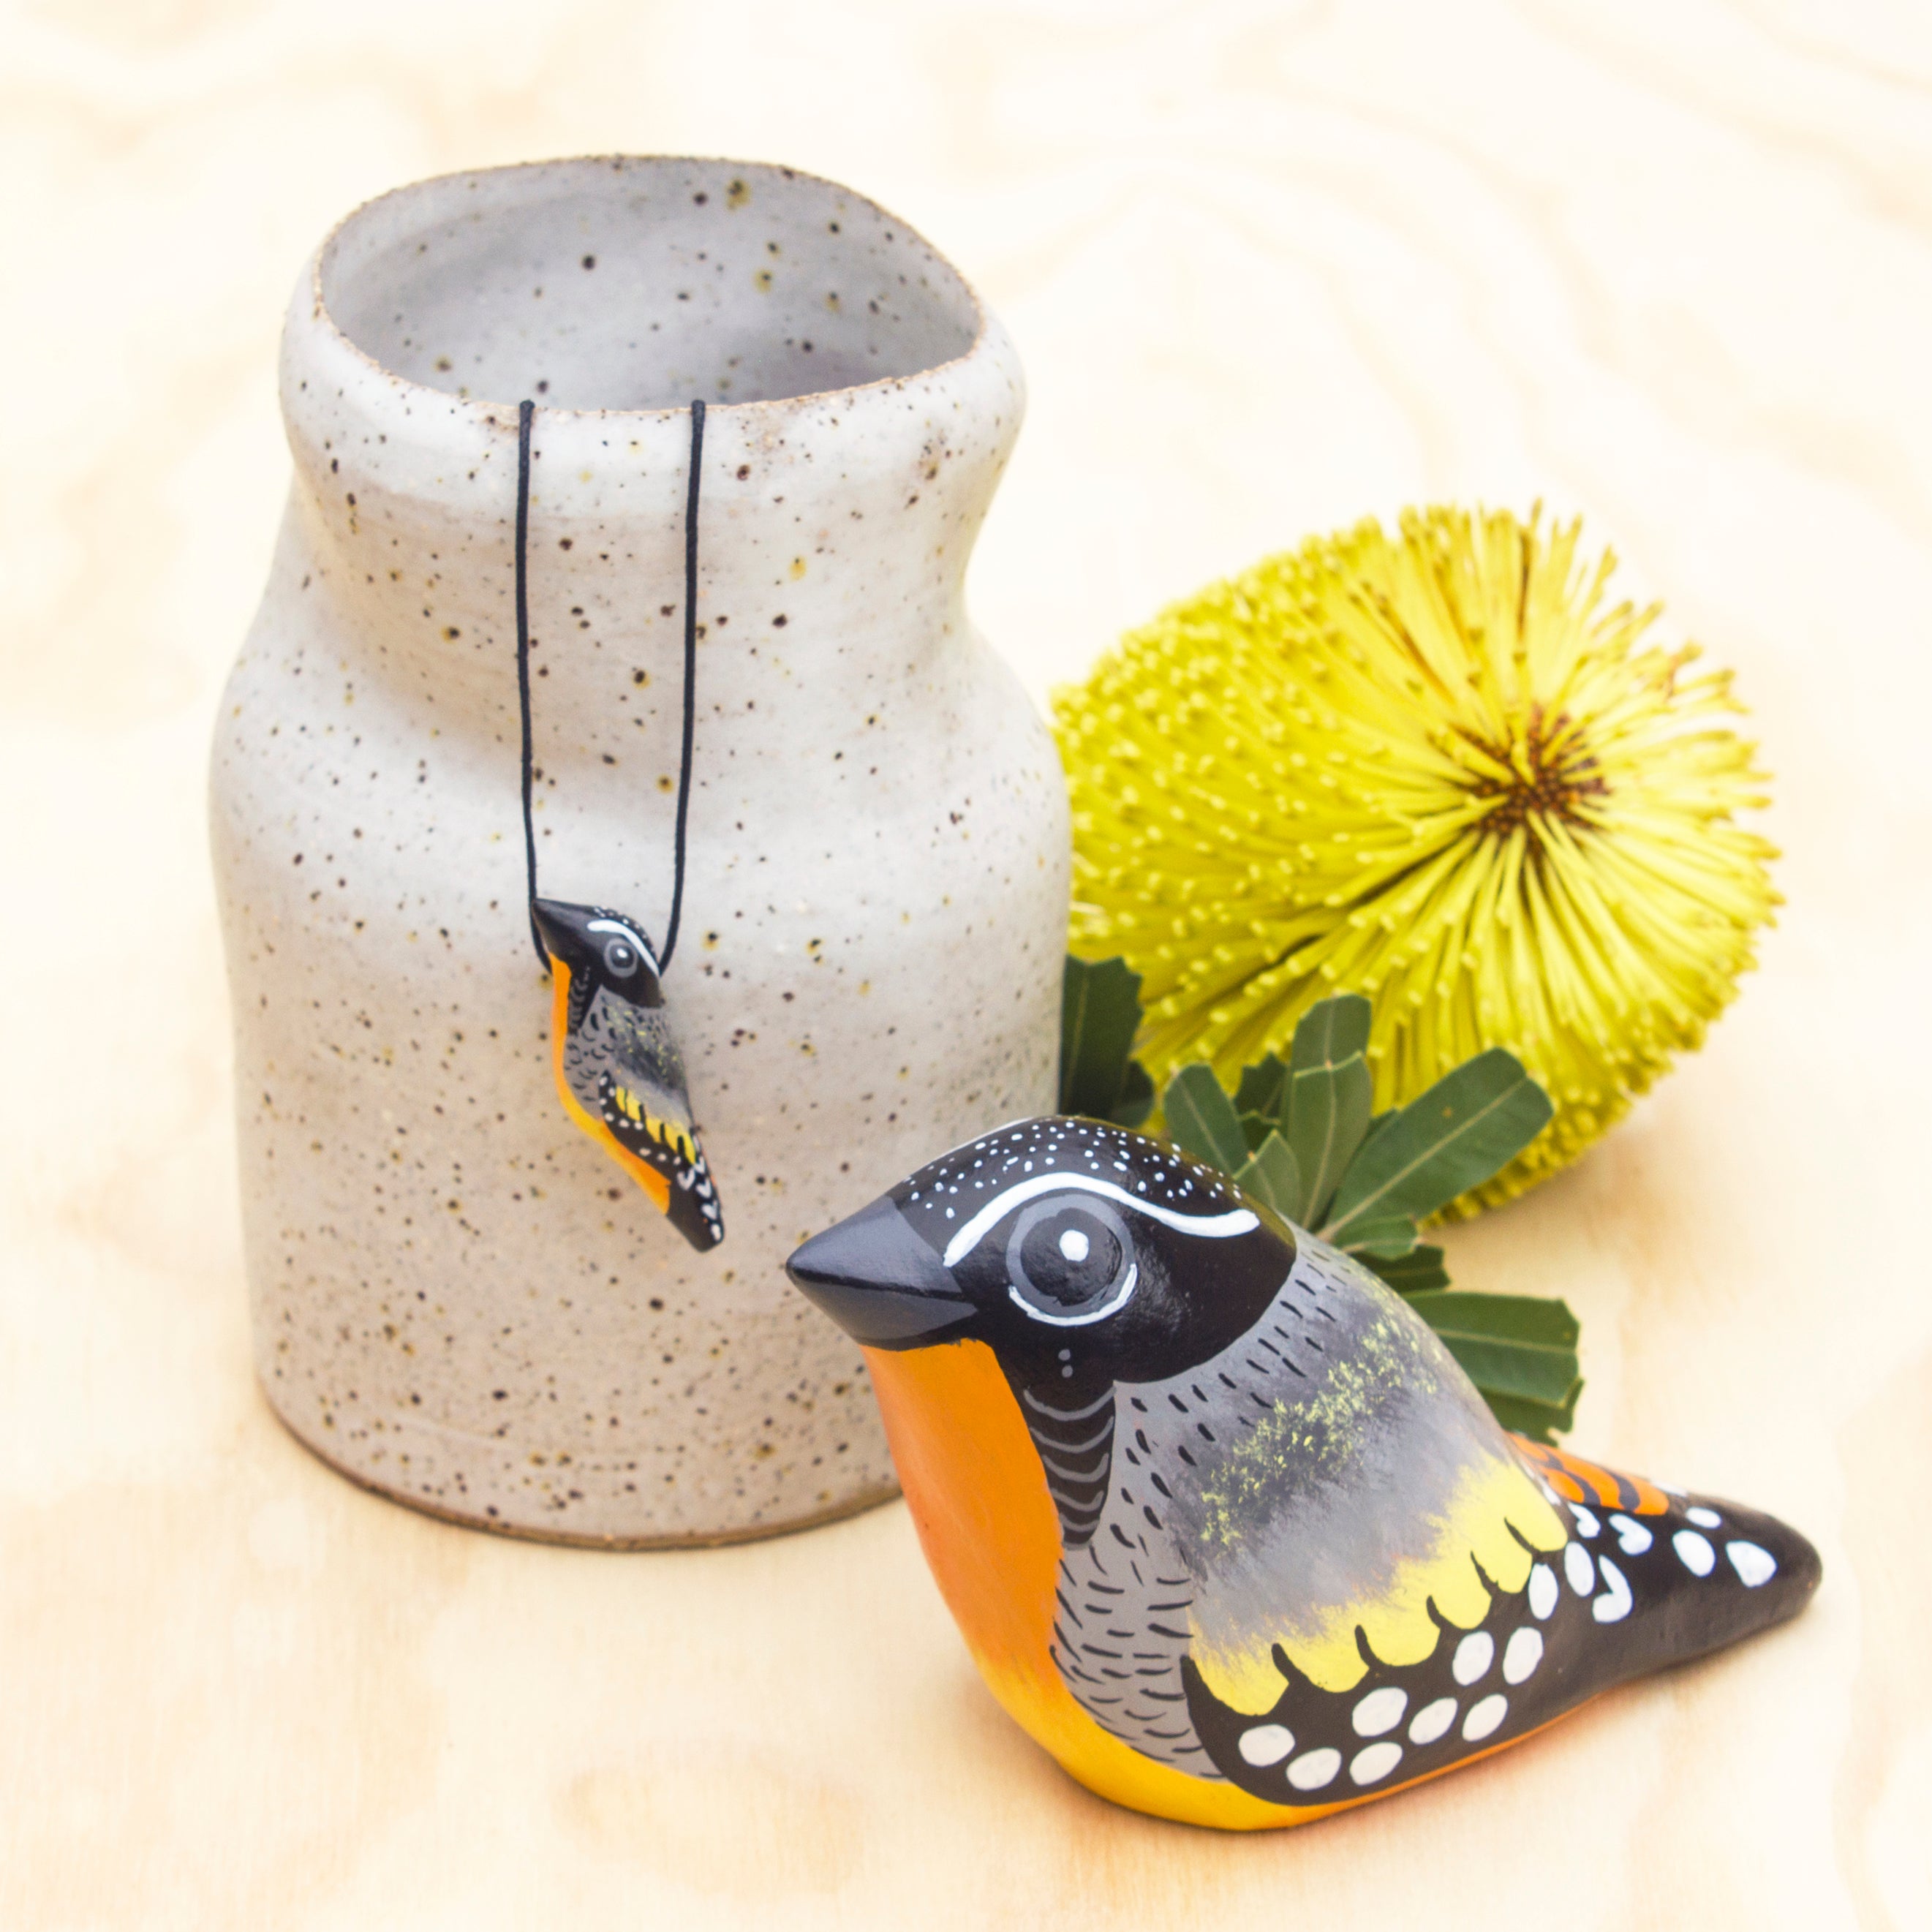 Spotted Pardalote Paperweight Whistle, Whistle Necklace - Handmade, Australian Birdlife, Songbird - Birds that make your heart sing...